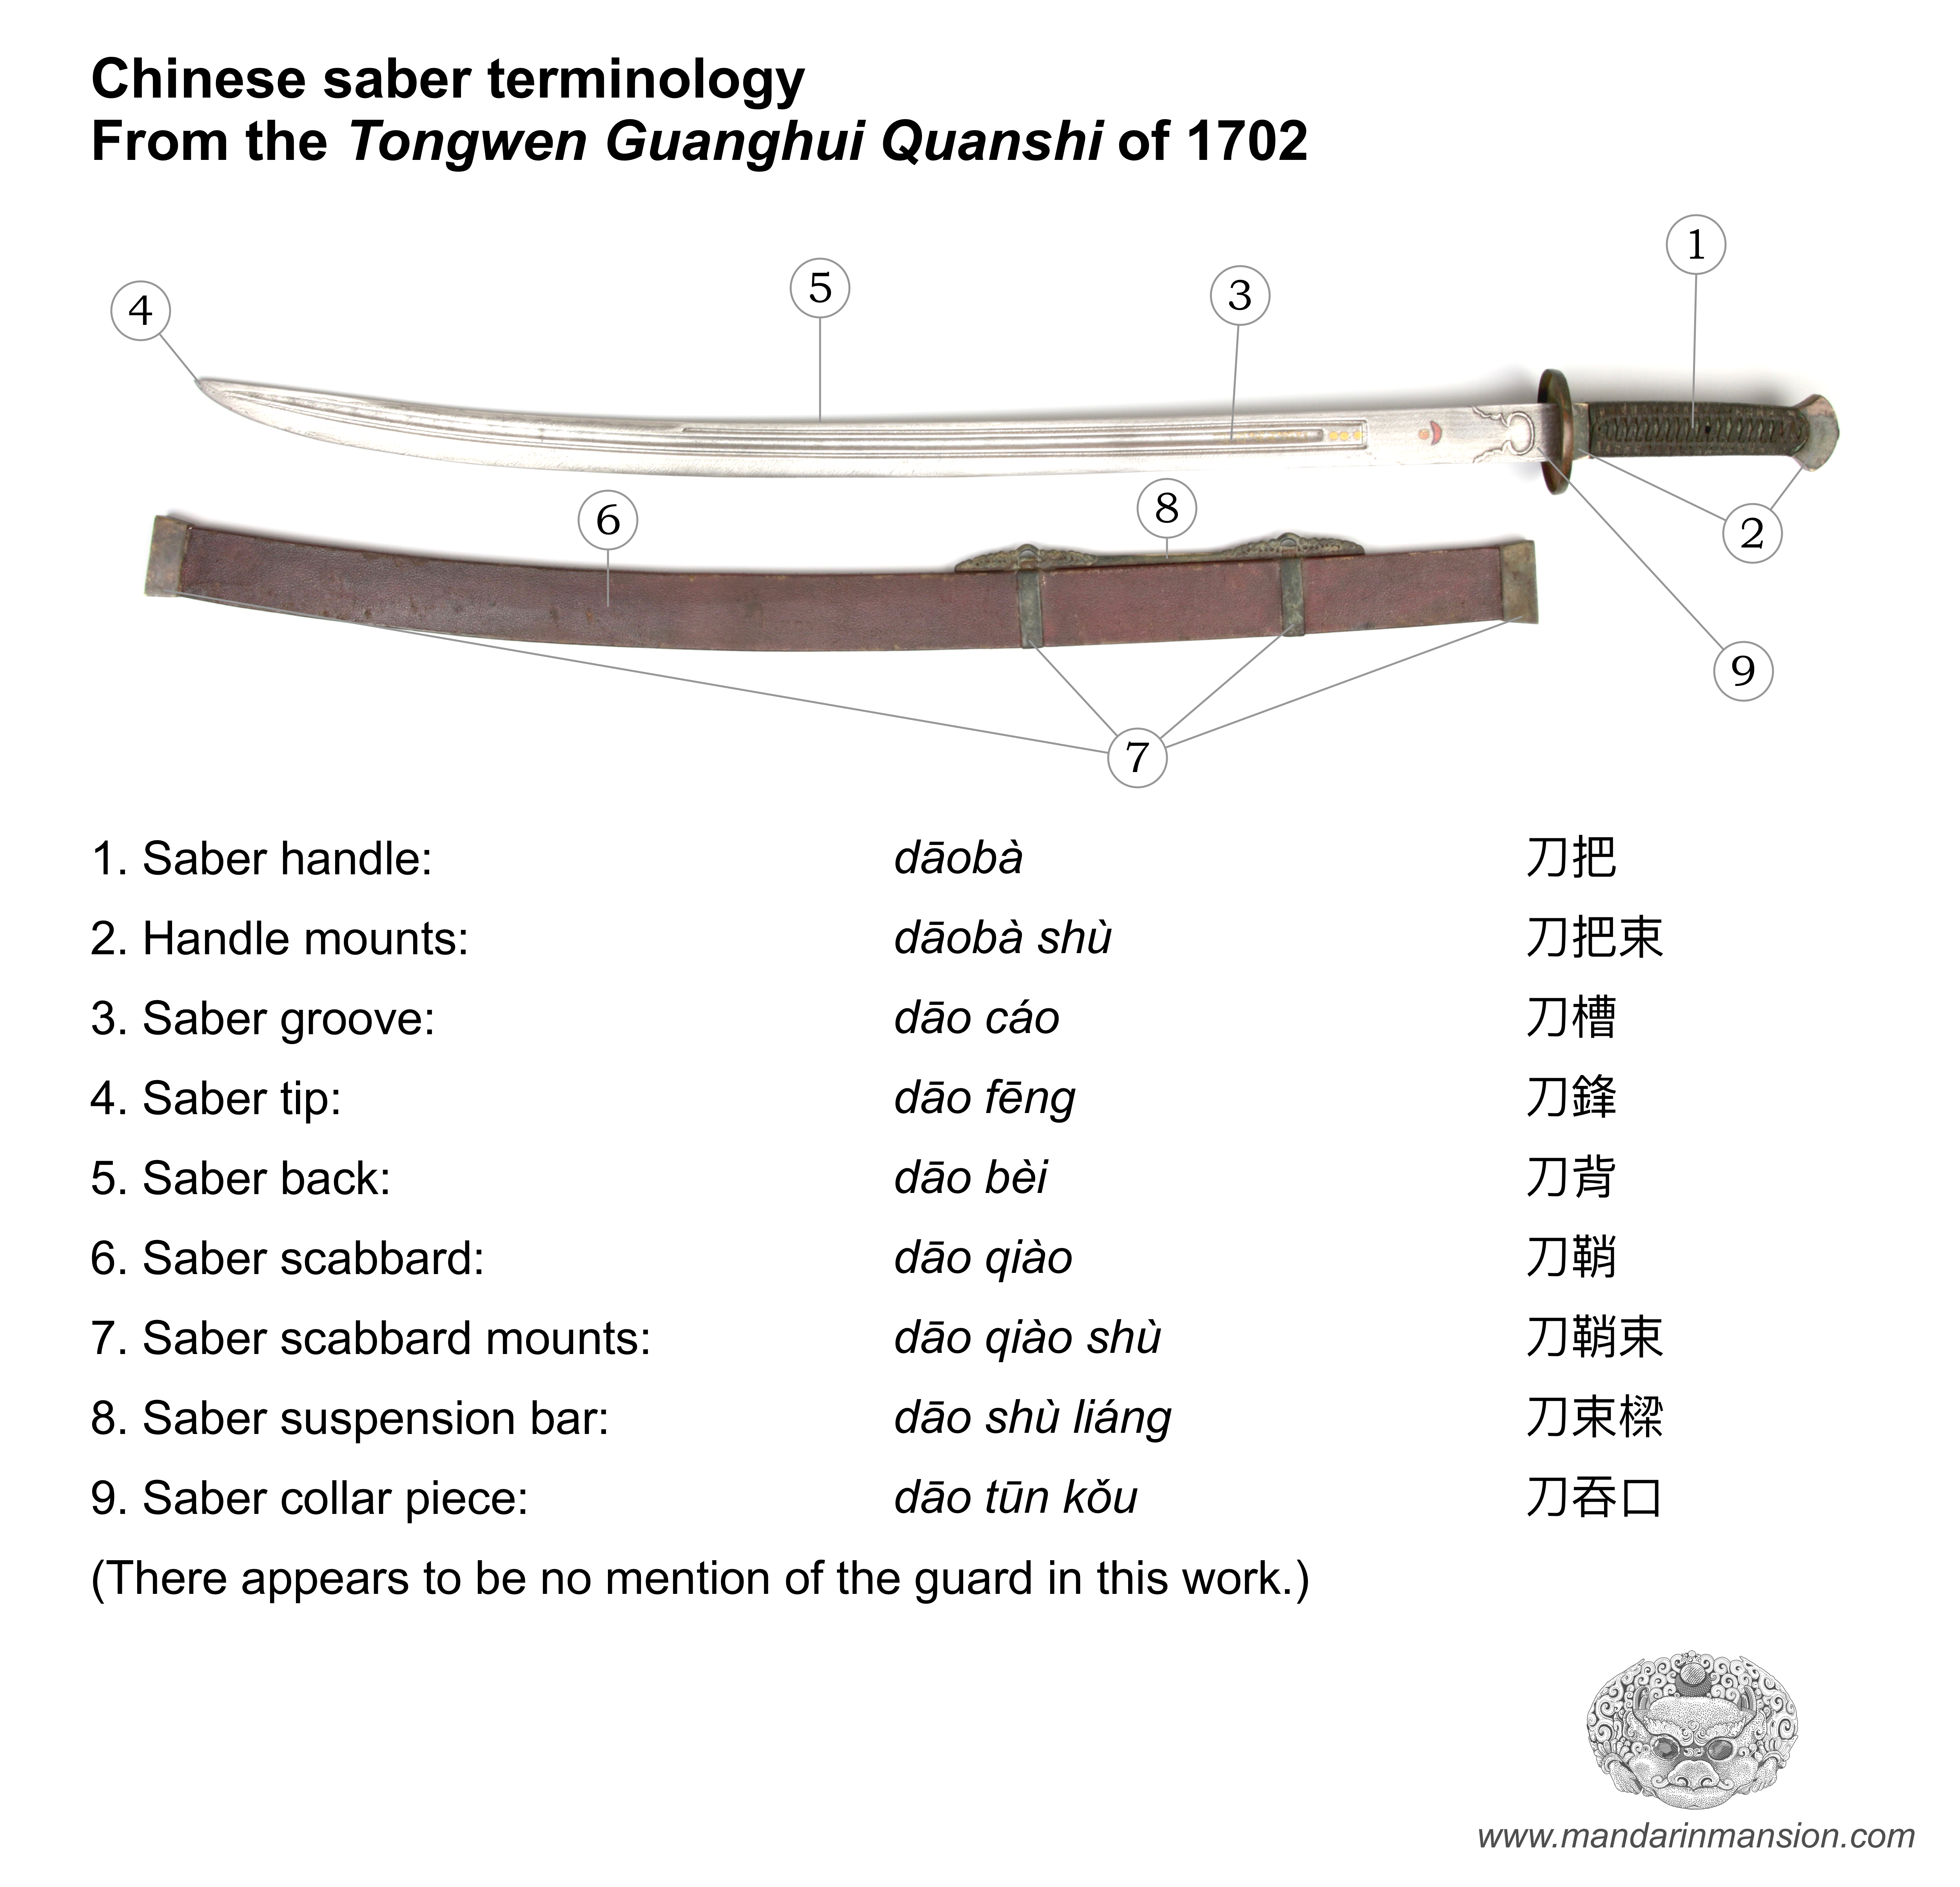 Chinese saber terminology overview of 1702